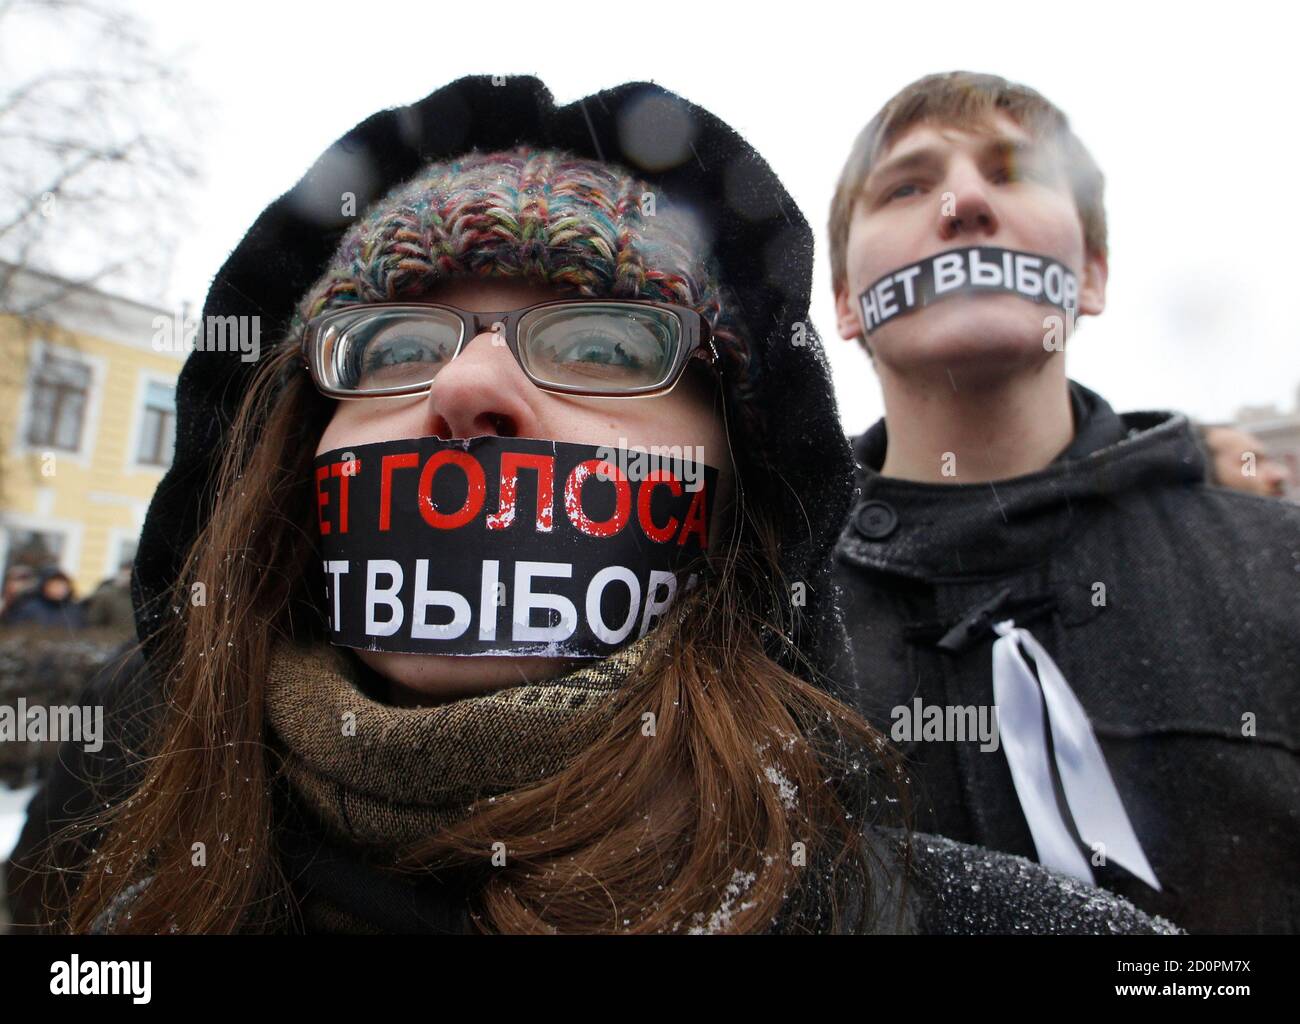 Protestors with mouths covered take part in a demonstration against recent parliamentary election results in St. Petersburg December 24, 2011. The slogan reads: 'No voice (vote), no choice (election)'. REUTERS/Alexander Demianchuk (RUSSIA - Tags: POLITICS CIVIL UNREST) Stock Photo